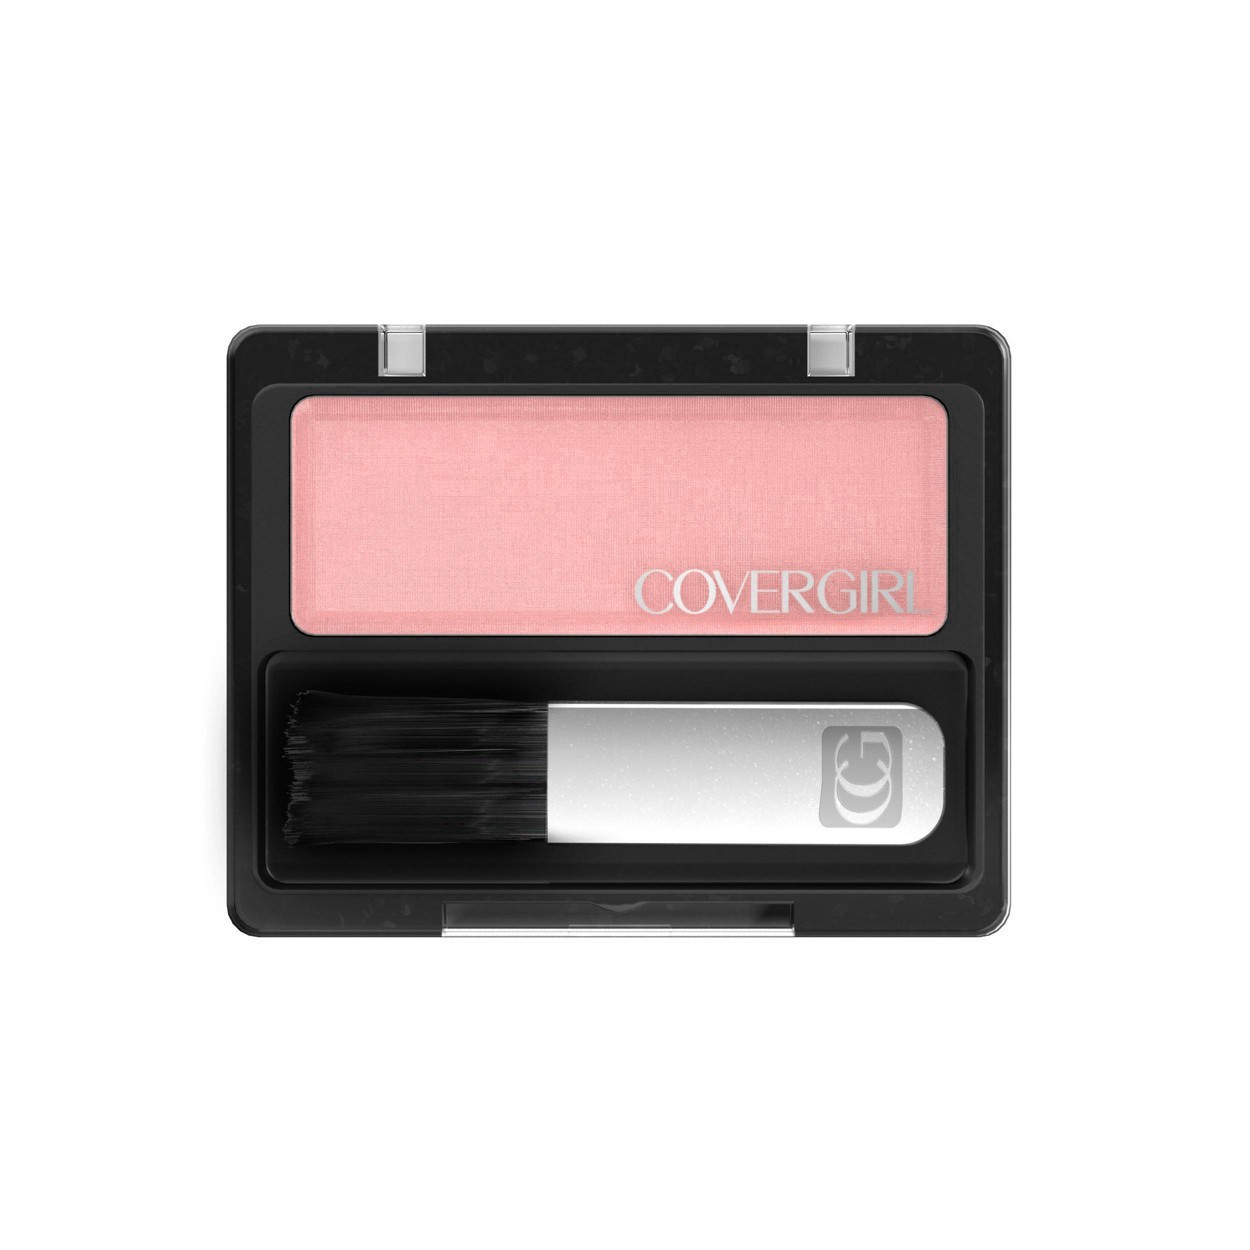 slide 14 of 42, Covergirl COVERGIRL Classic Color Blush Rose Silk, 1 ct